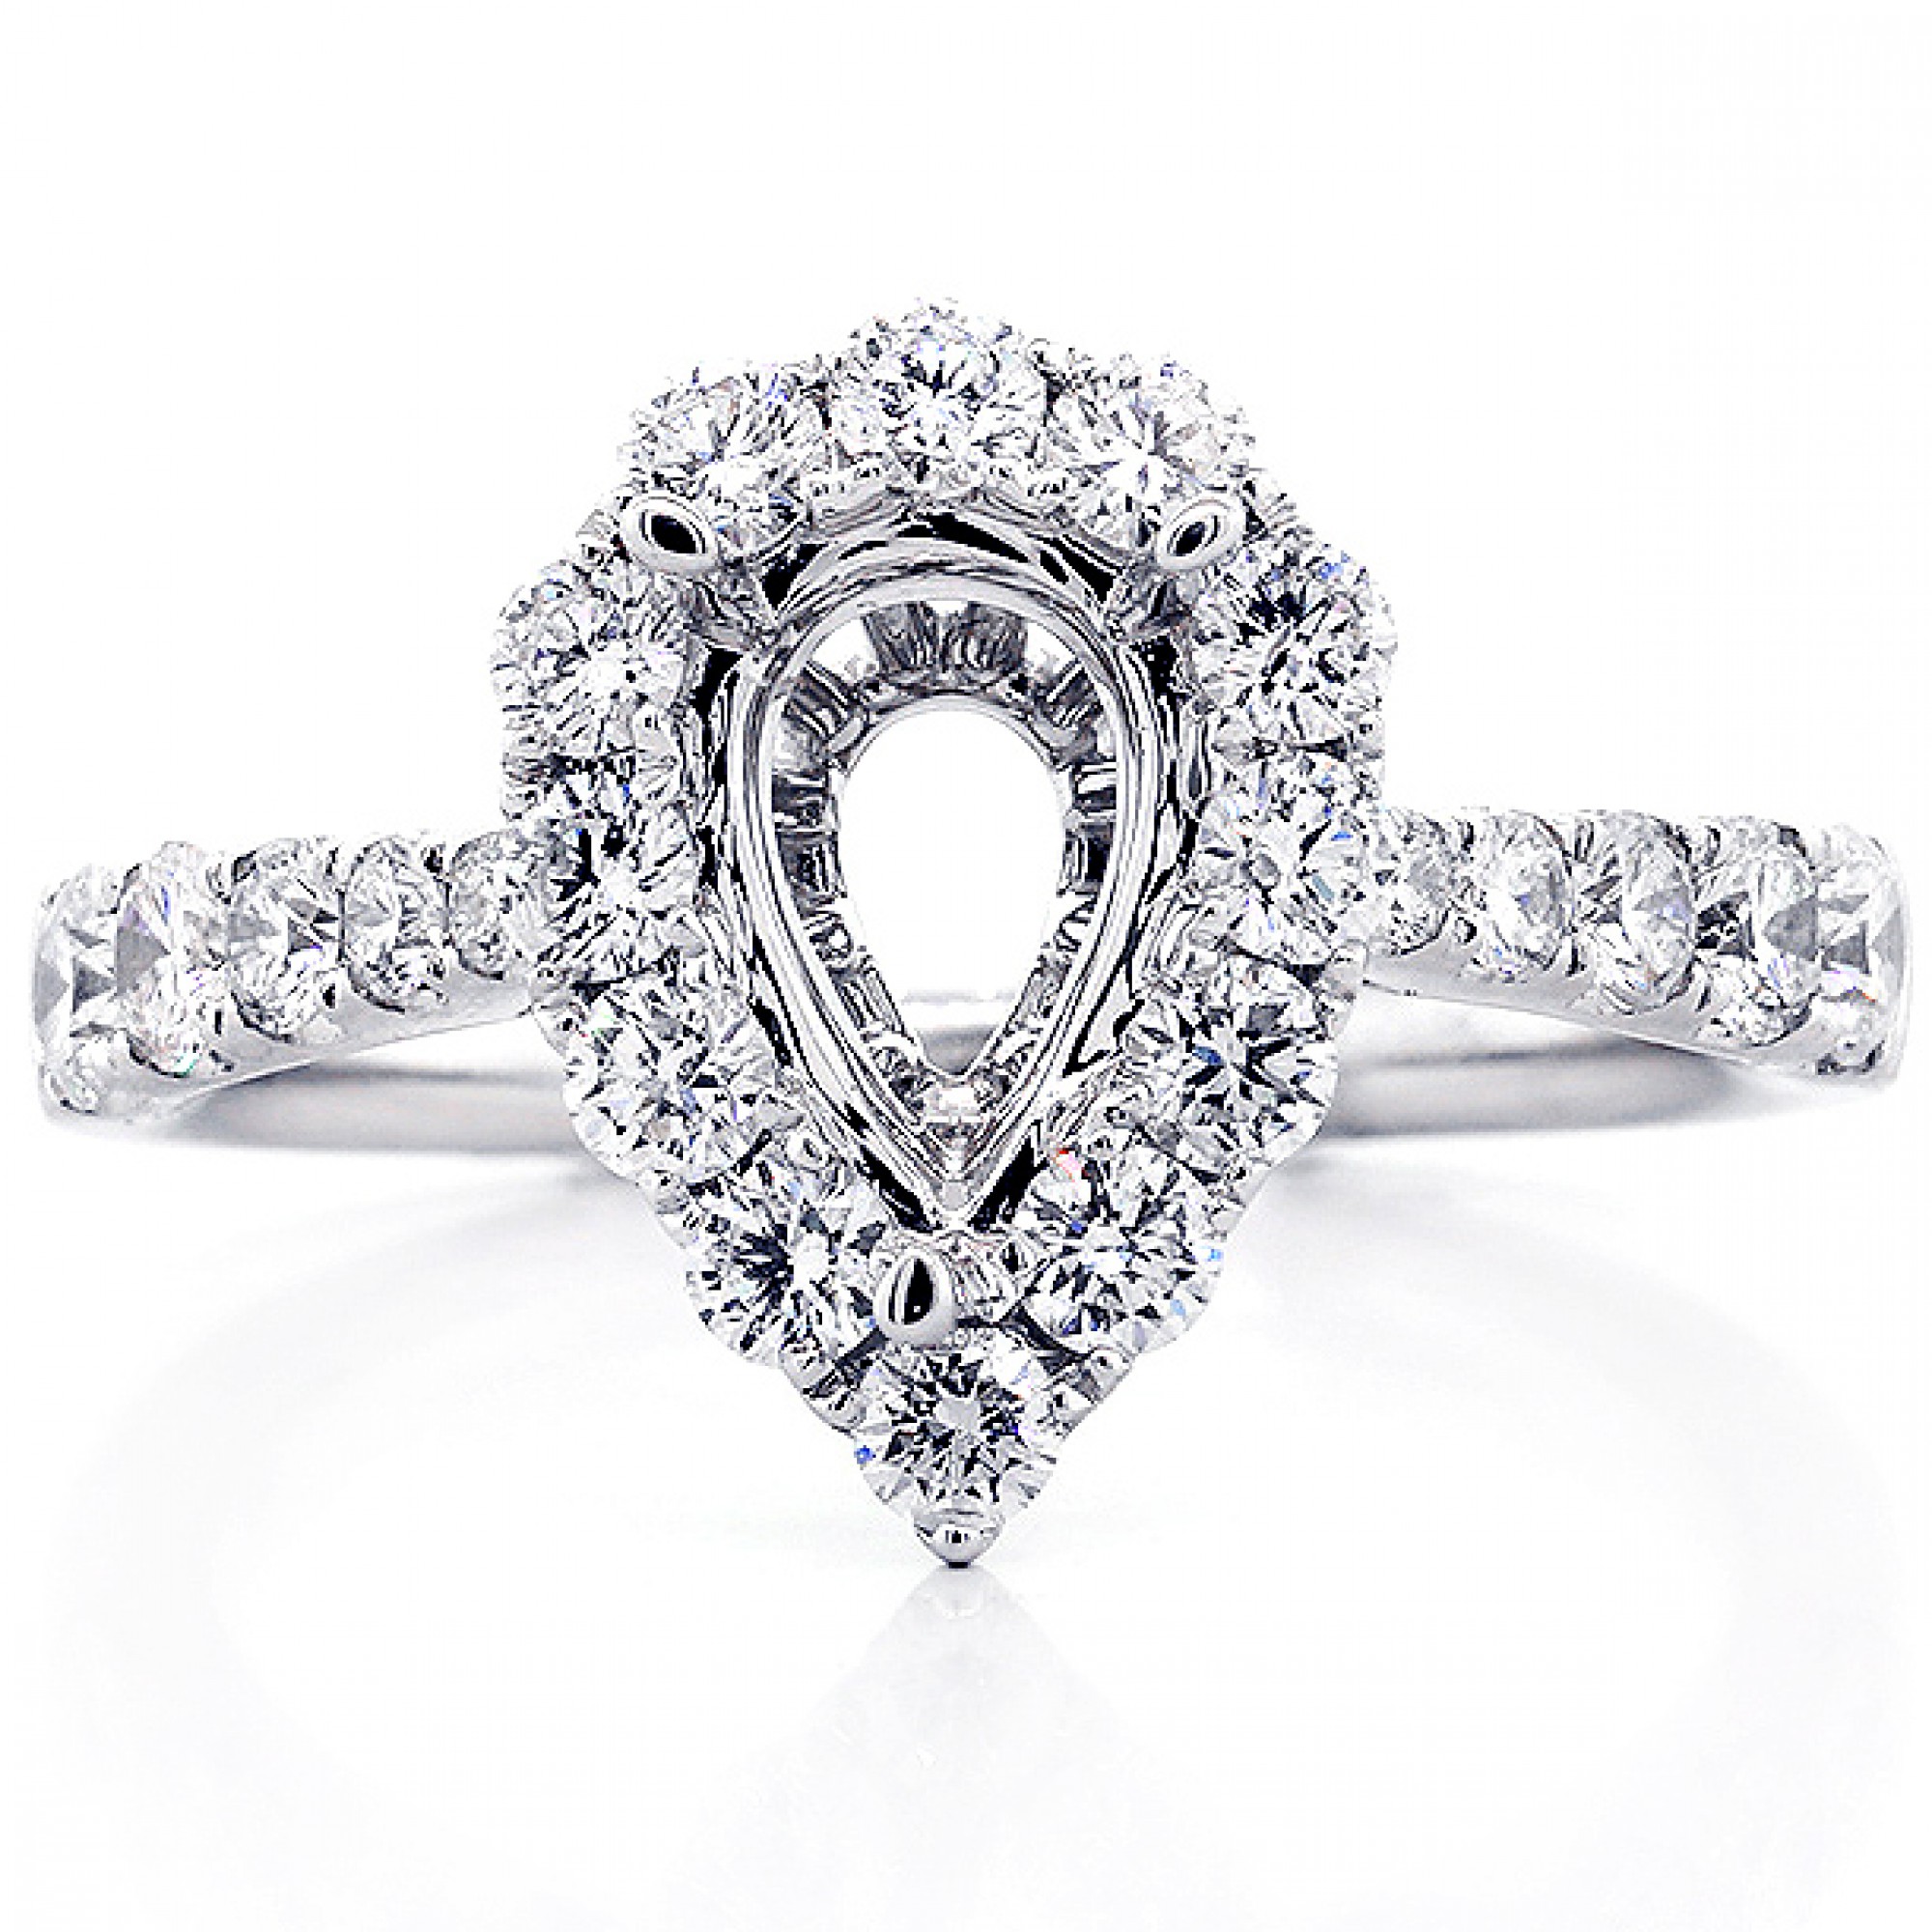 1.07 Cts Pear Shaped Diamond Halo Engagement Ring Setting set in 18K